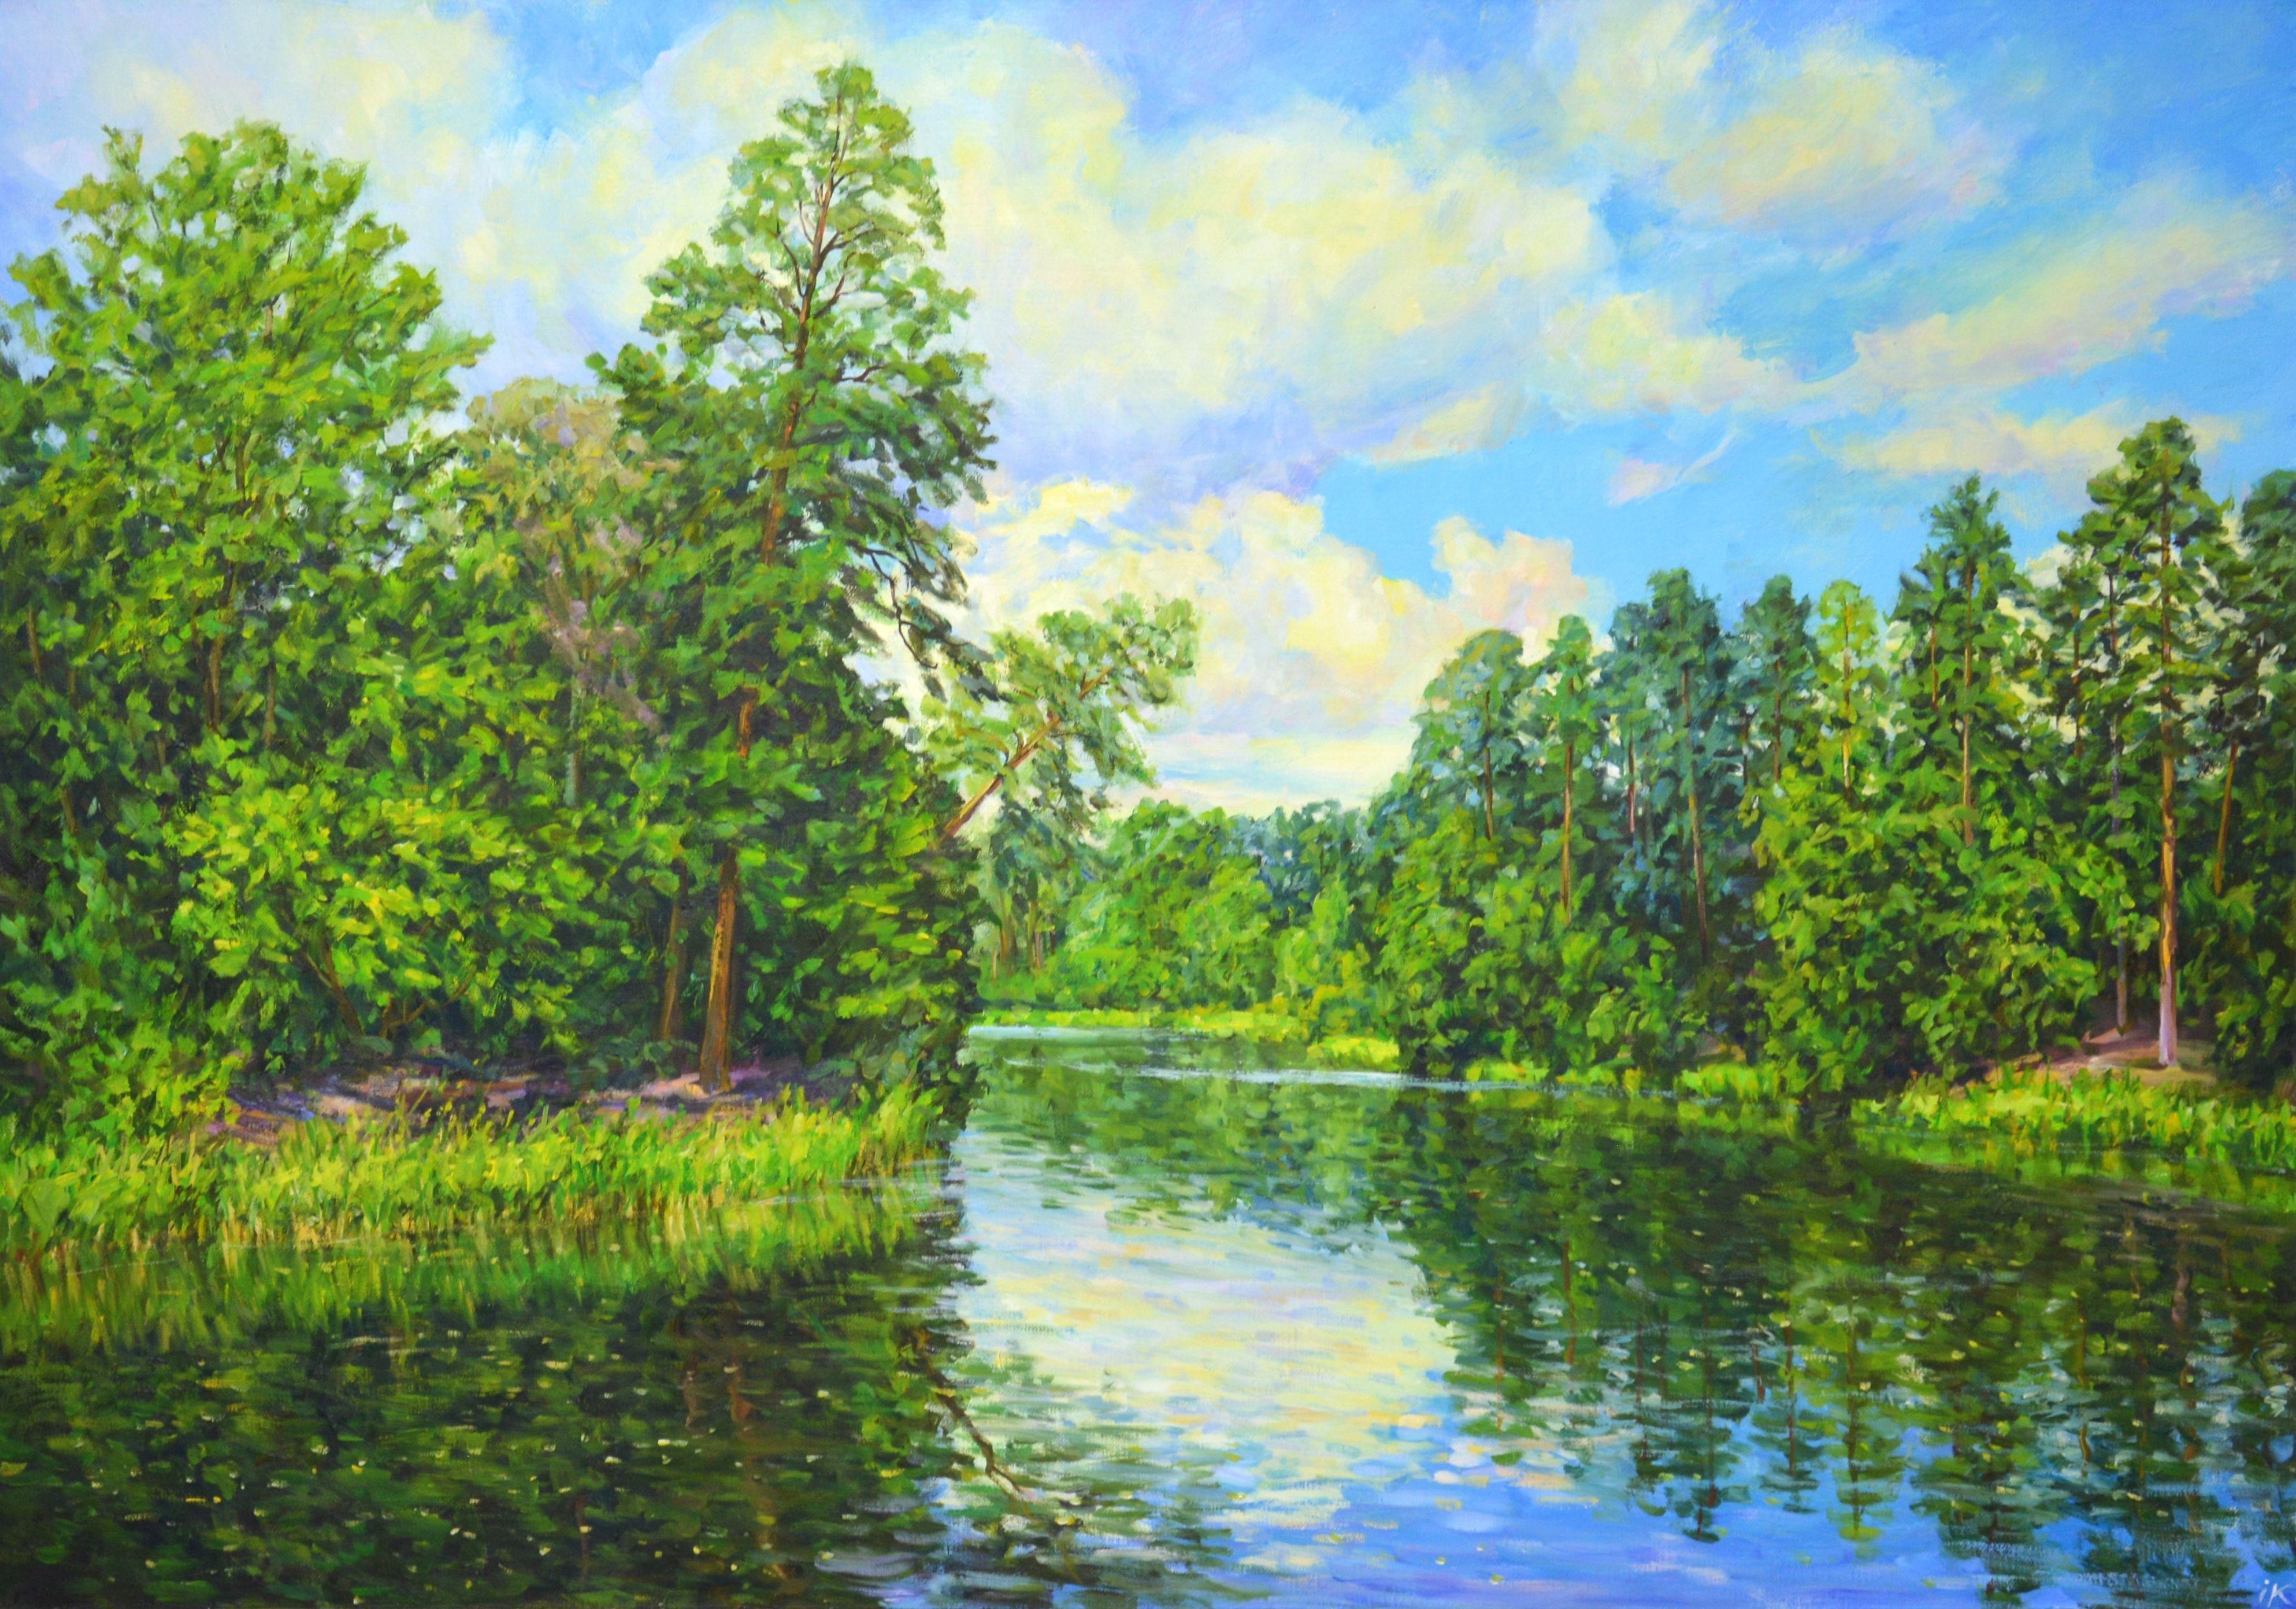 Summer landscape. The saturated palette of greenery, the lake, the forest, the pines, the reflection of the sky in the water, the clouds evoke a feeling of love and gratitude to nature. The picture has good spatial quality, and the colors cause a